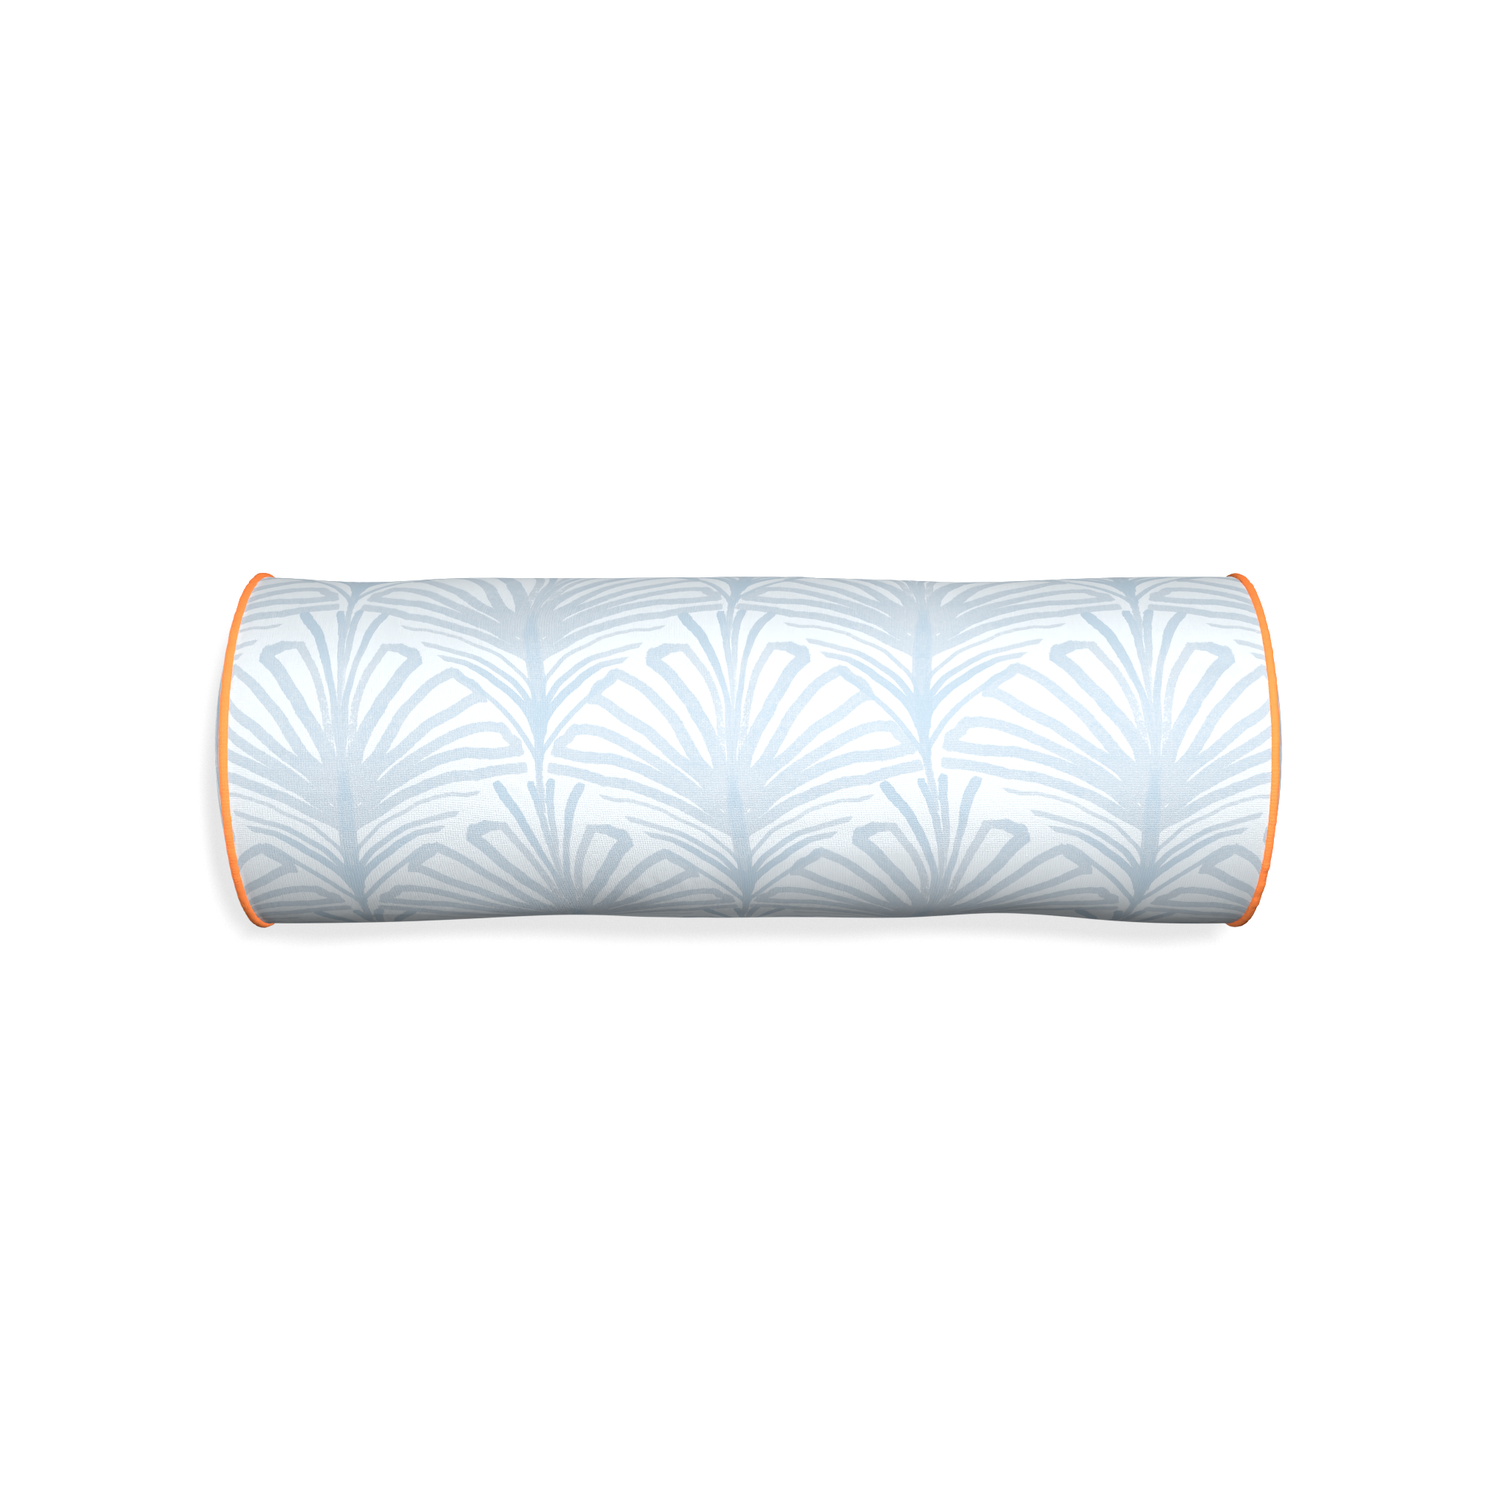 Bolster suzy sky custom sky blue palmpillow with clementine piping on white background